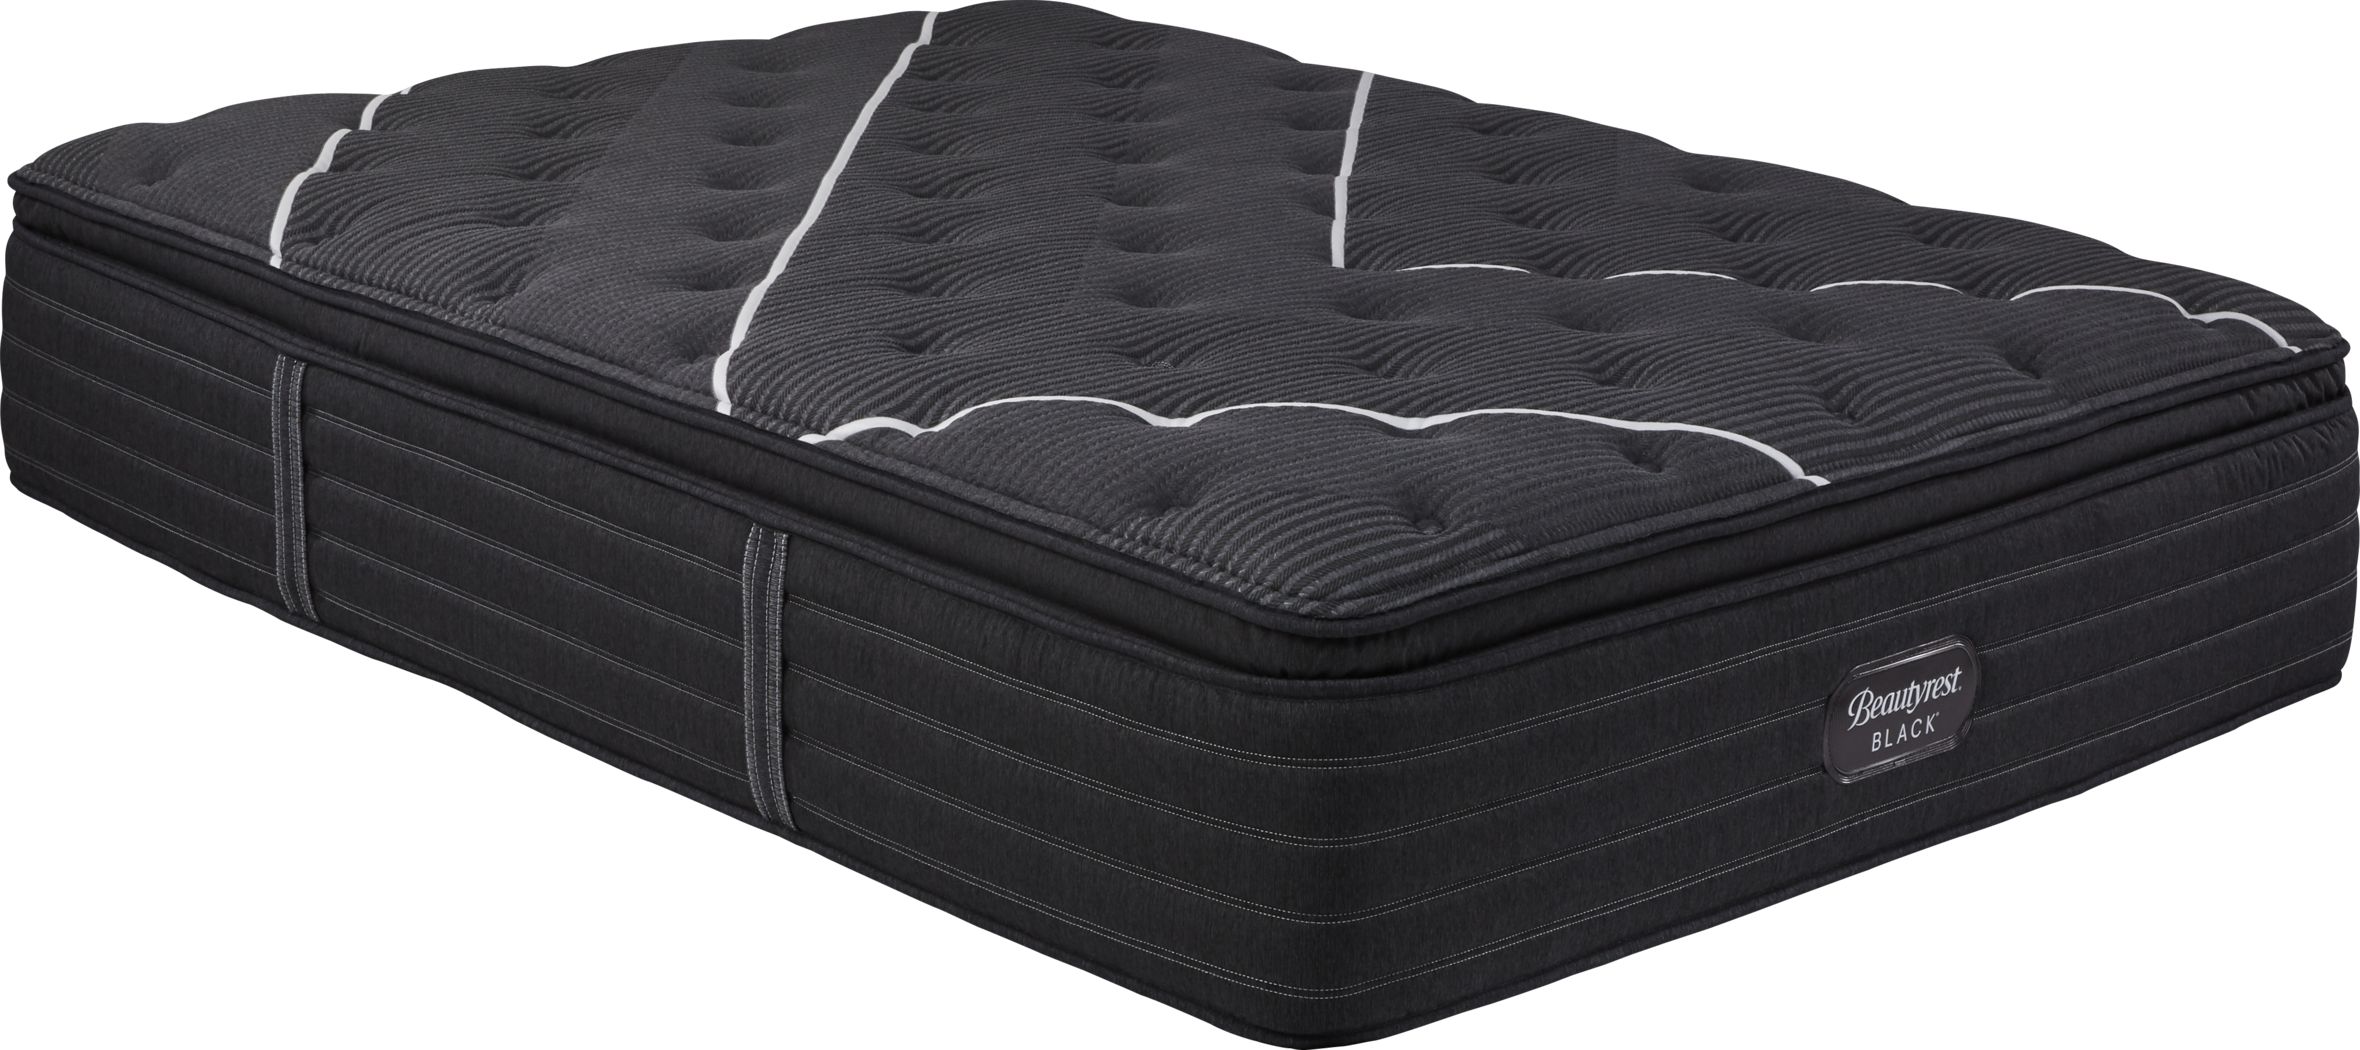 types of mattresses and prices pillowtop king